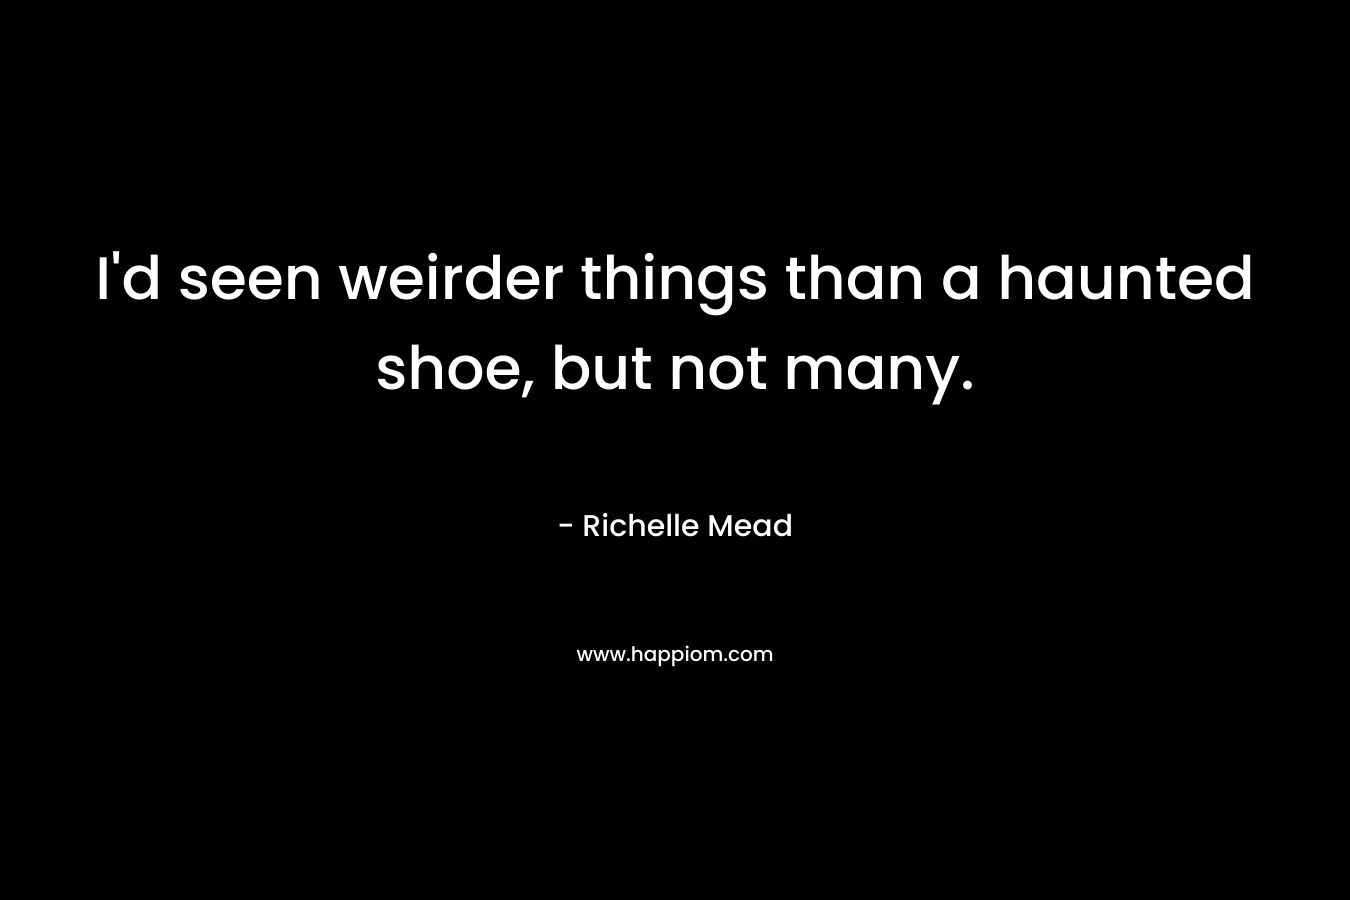 I'd seen weirder things than a haunted shoe, but not many.